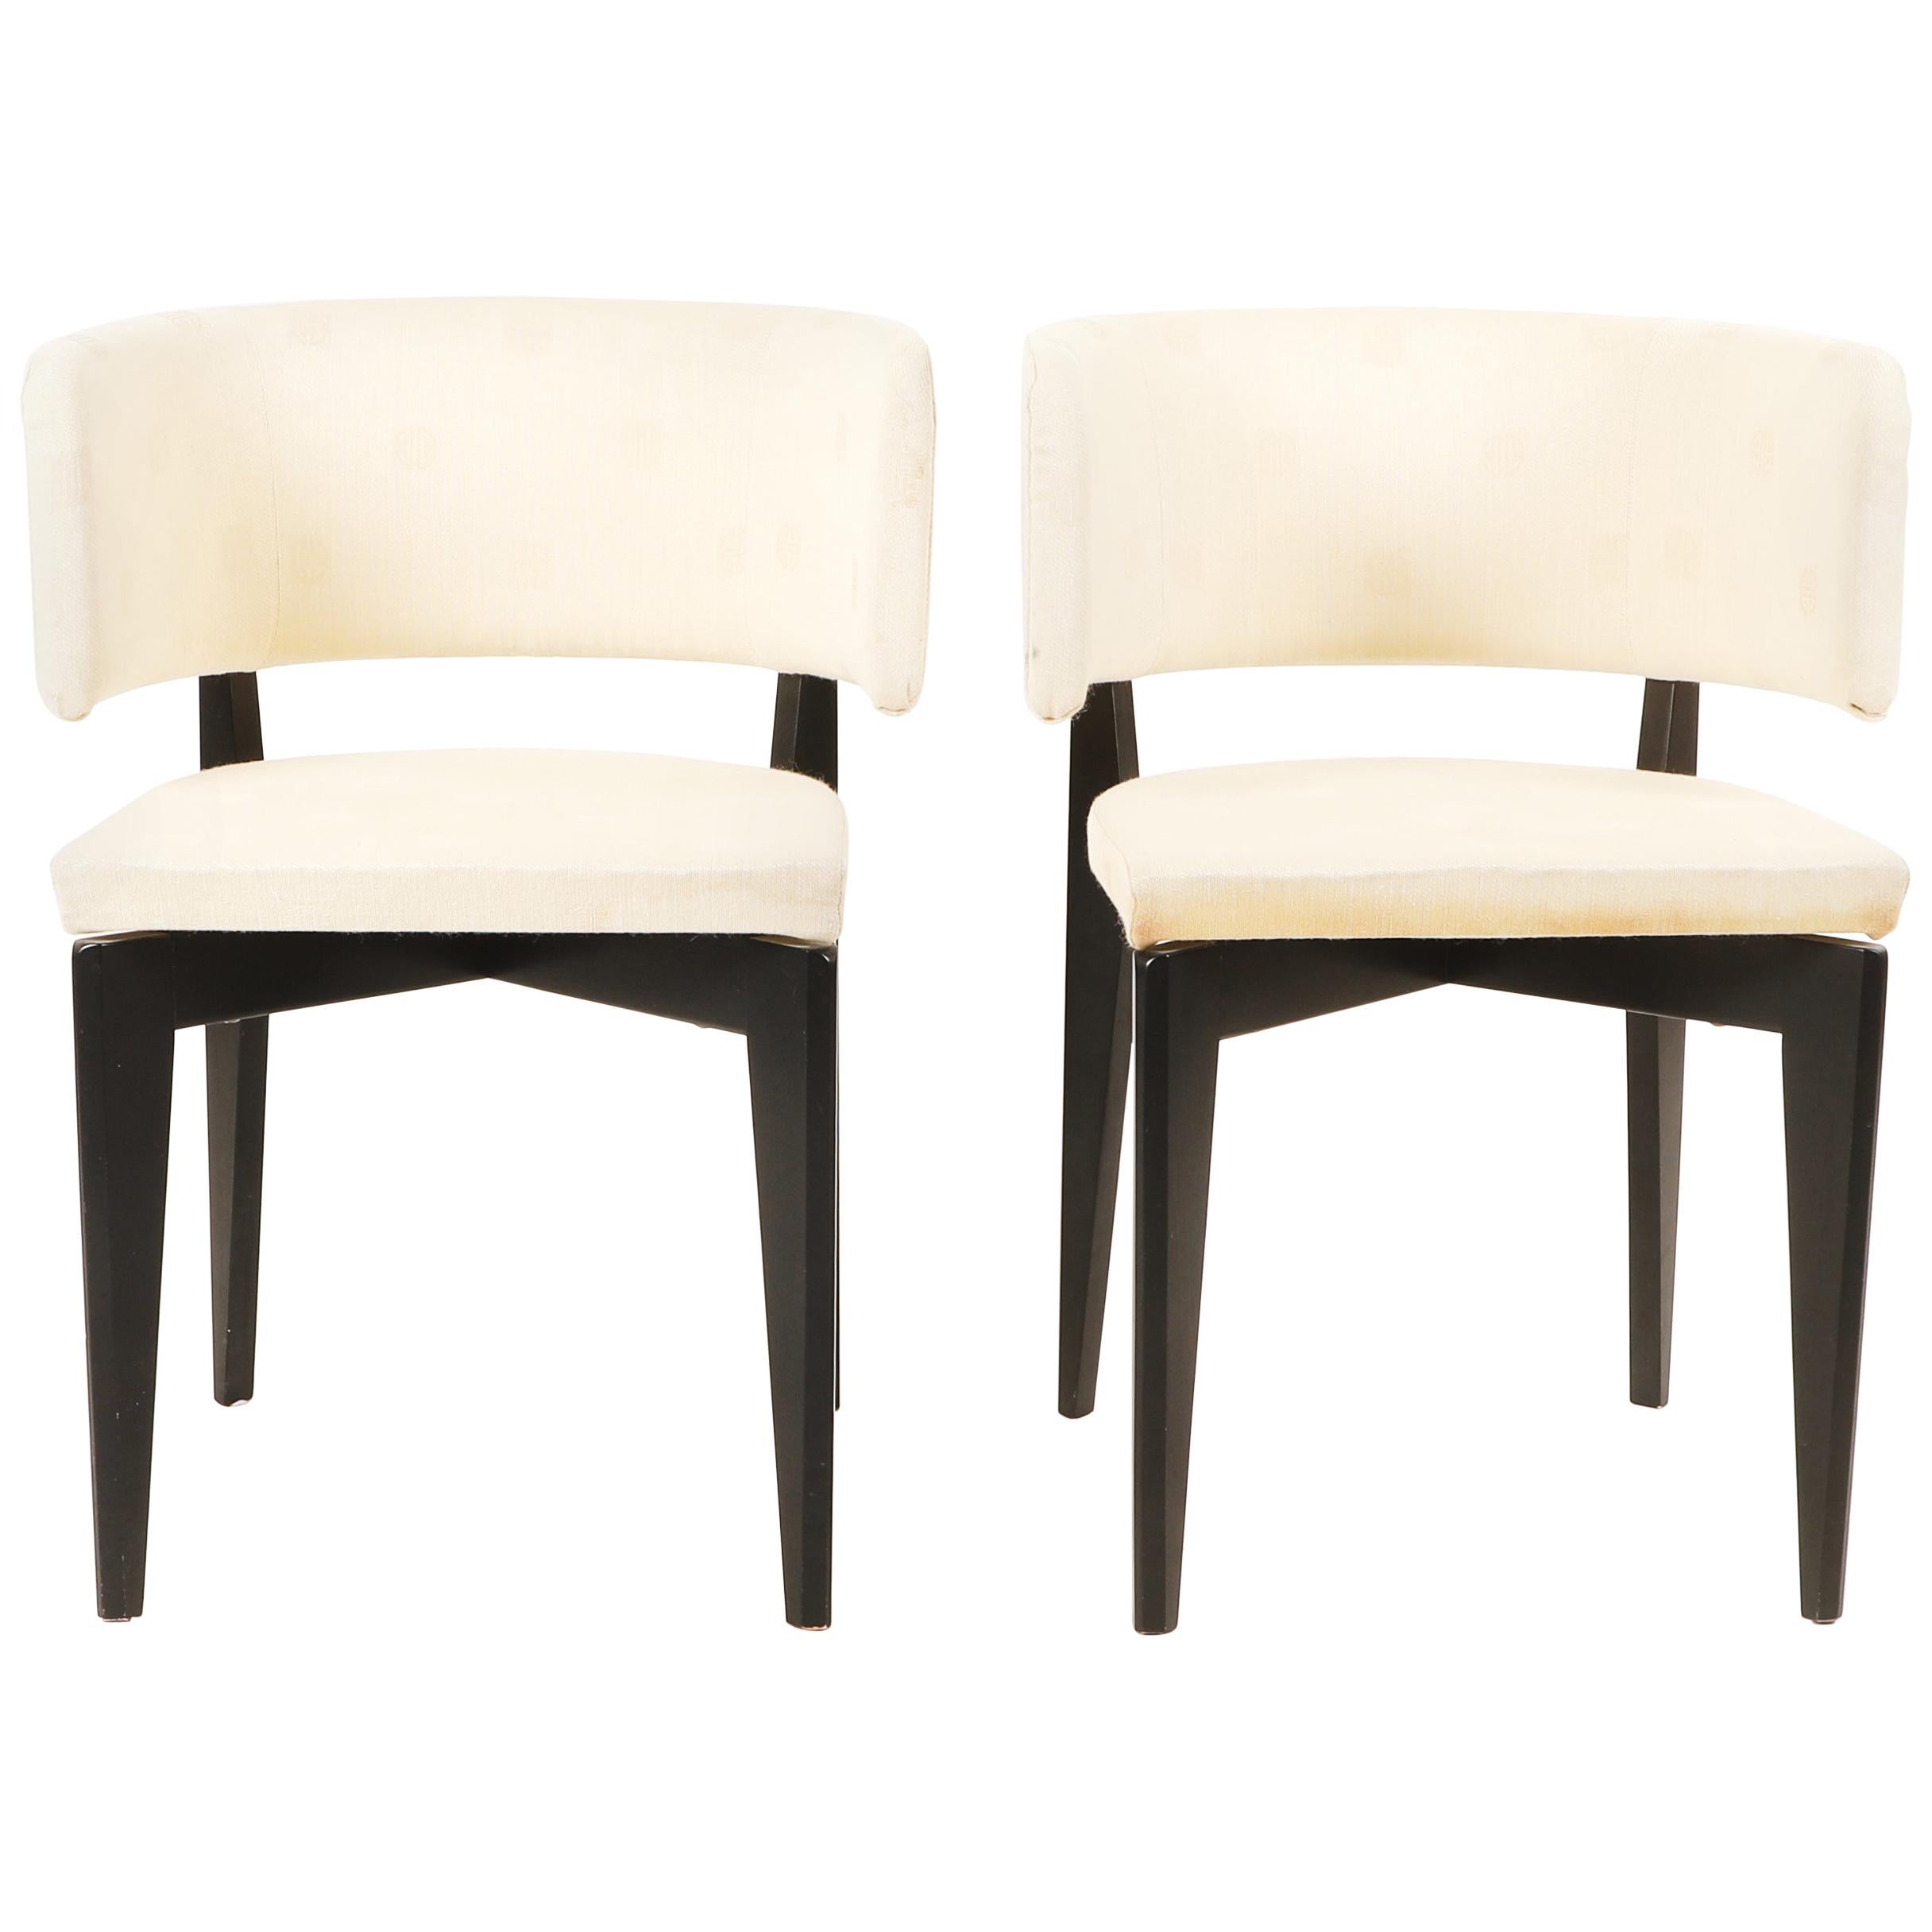 Klismos Pair of Mid-Century Modern Black Lacquered Dining Chairs